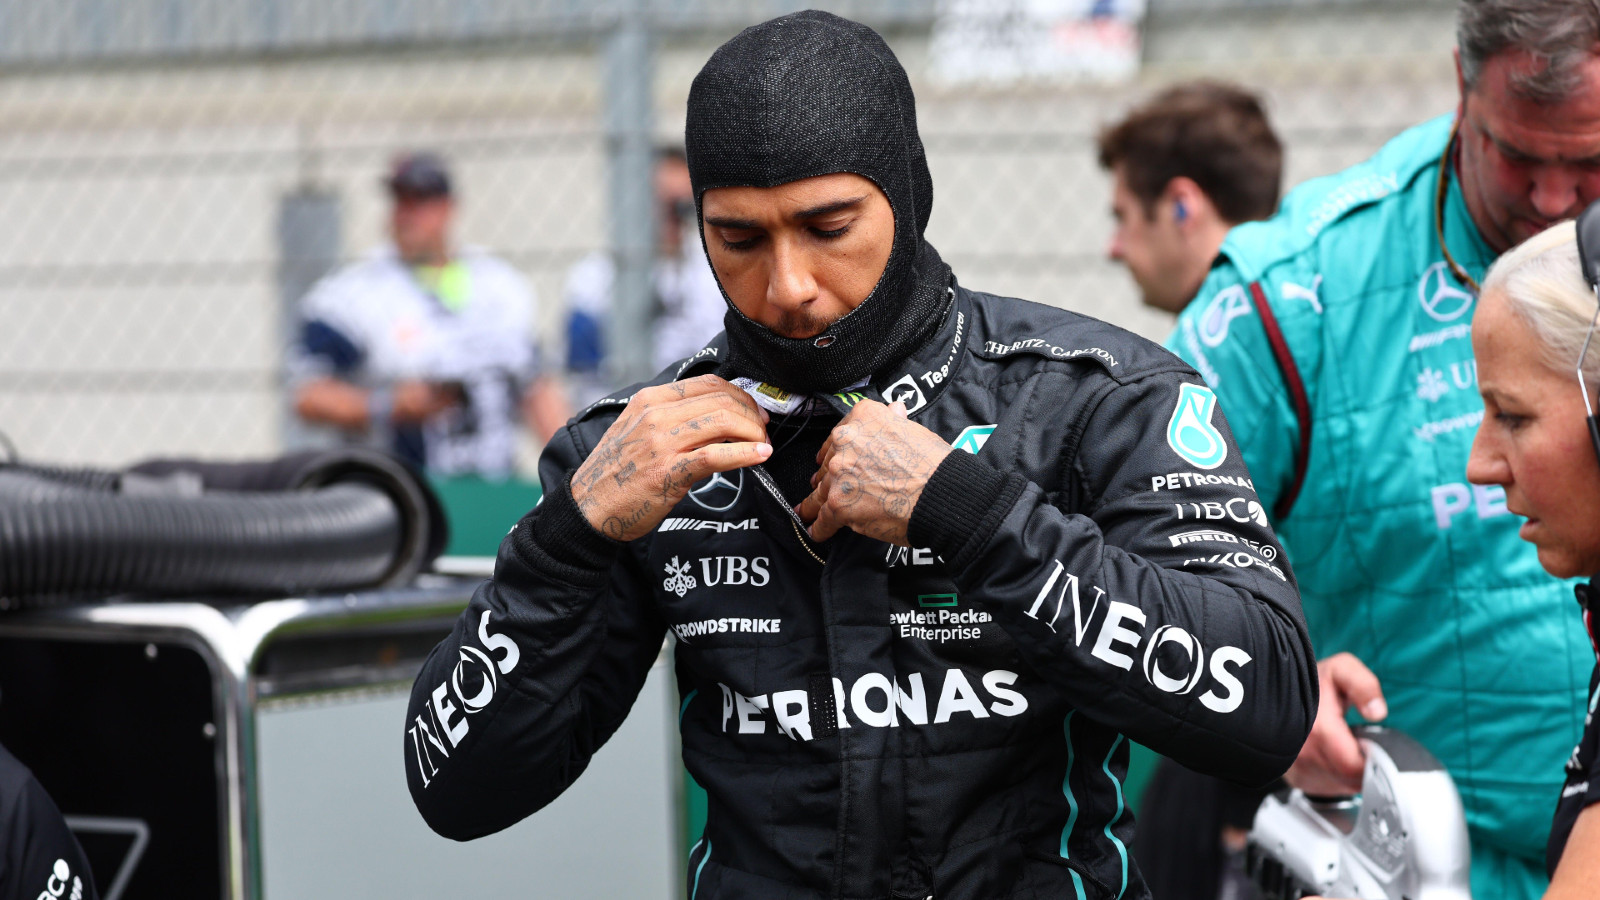 Mercedes' Lewis Hamilton gets ready for Sprint Qualifying at the Austrian Grand Prix. Spielberg, July 2022.